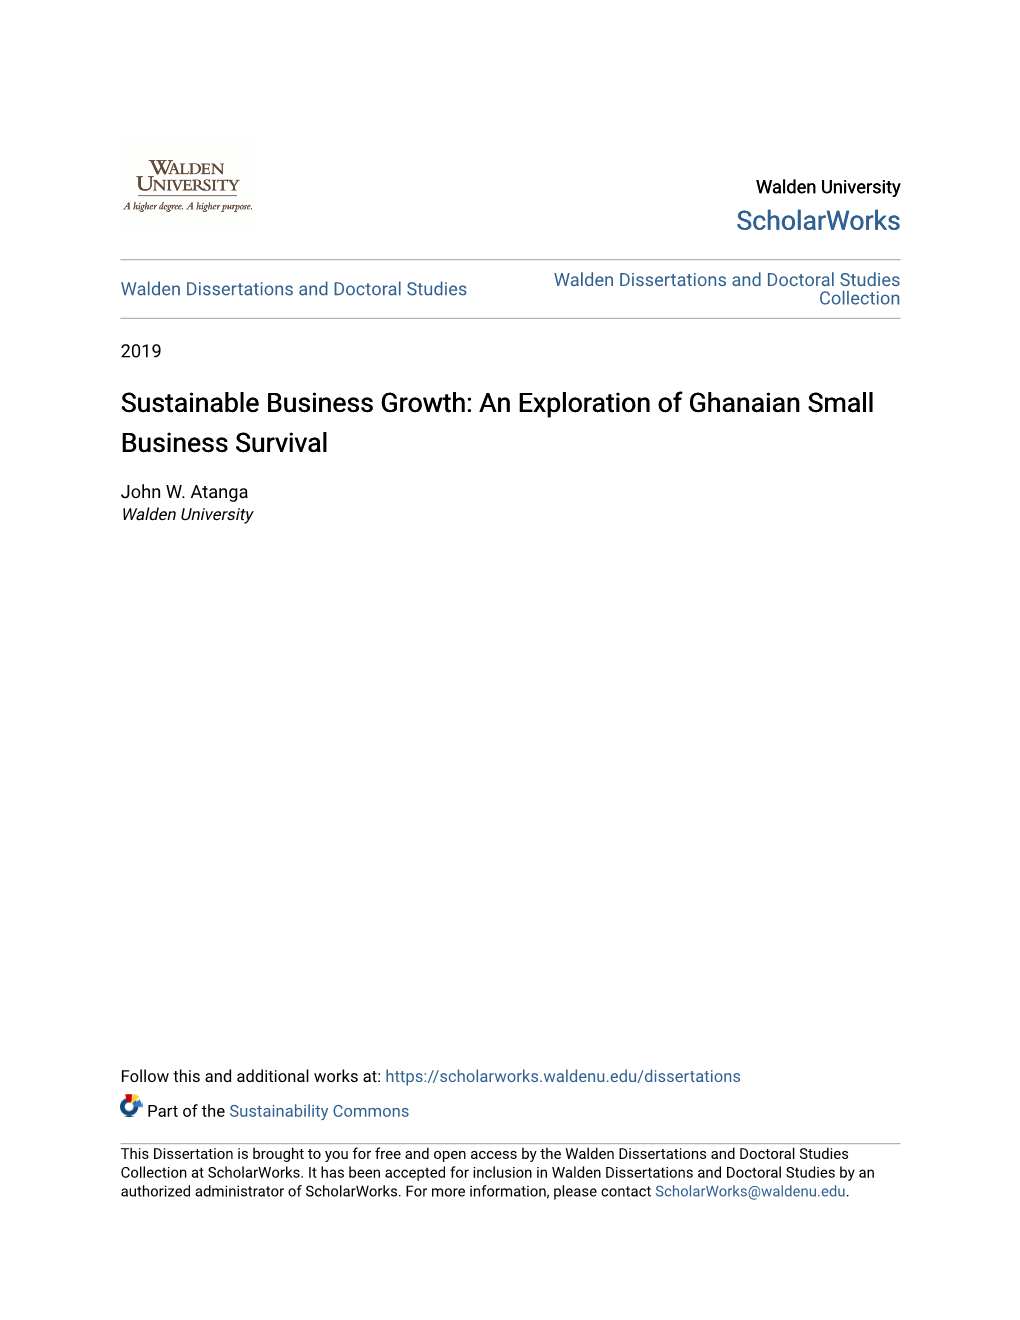 Sustainable Business Growth: an Exploration of Ghanaian Small Business Survival